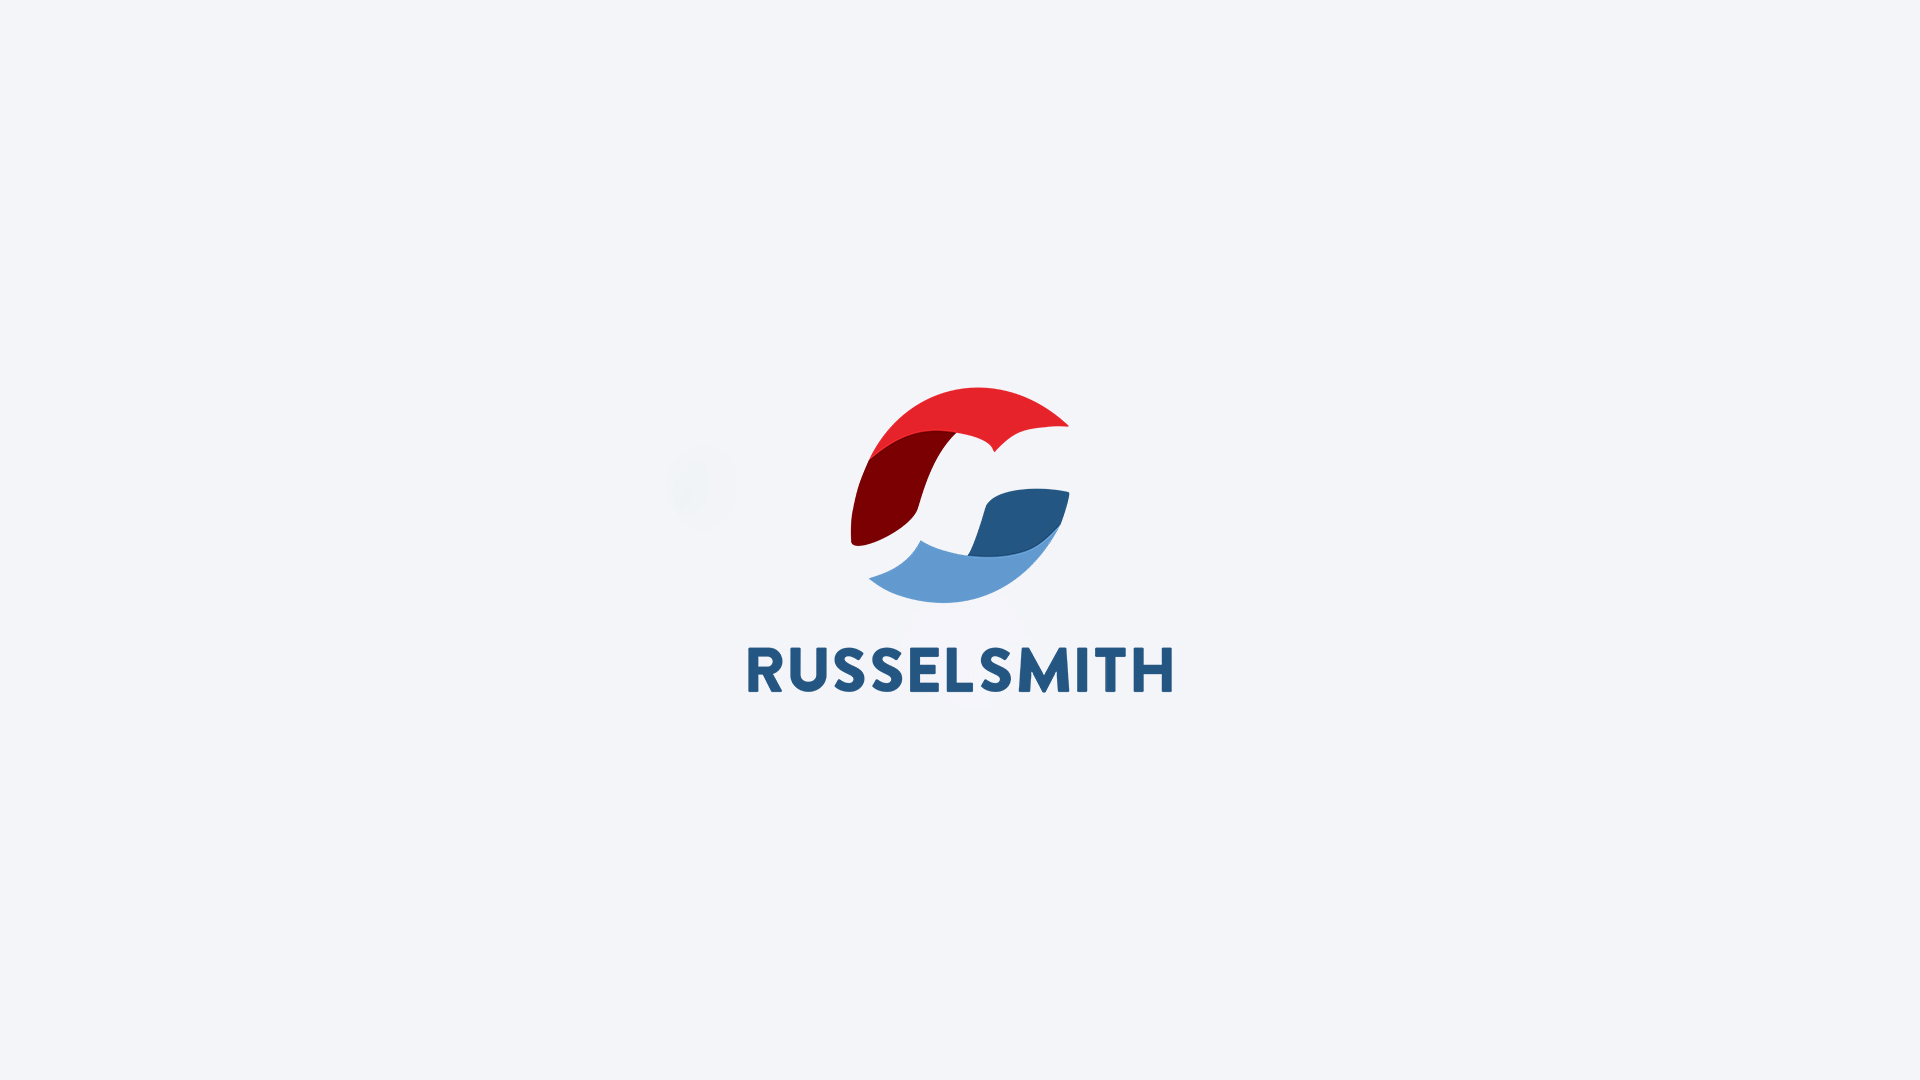 RusselSmith joins the Roboze 3D Parts Network